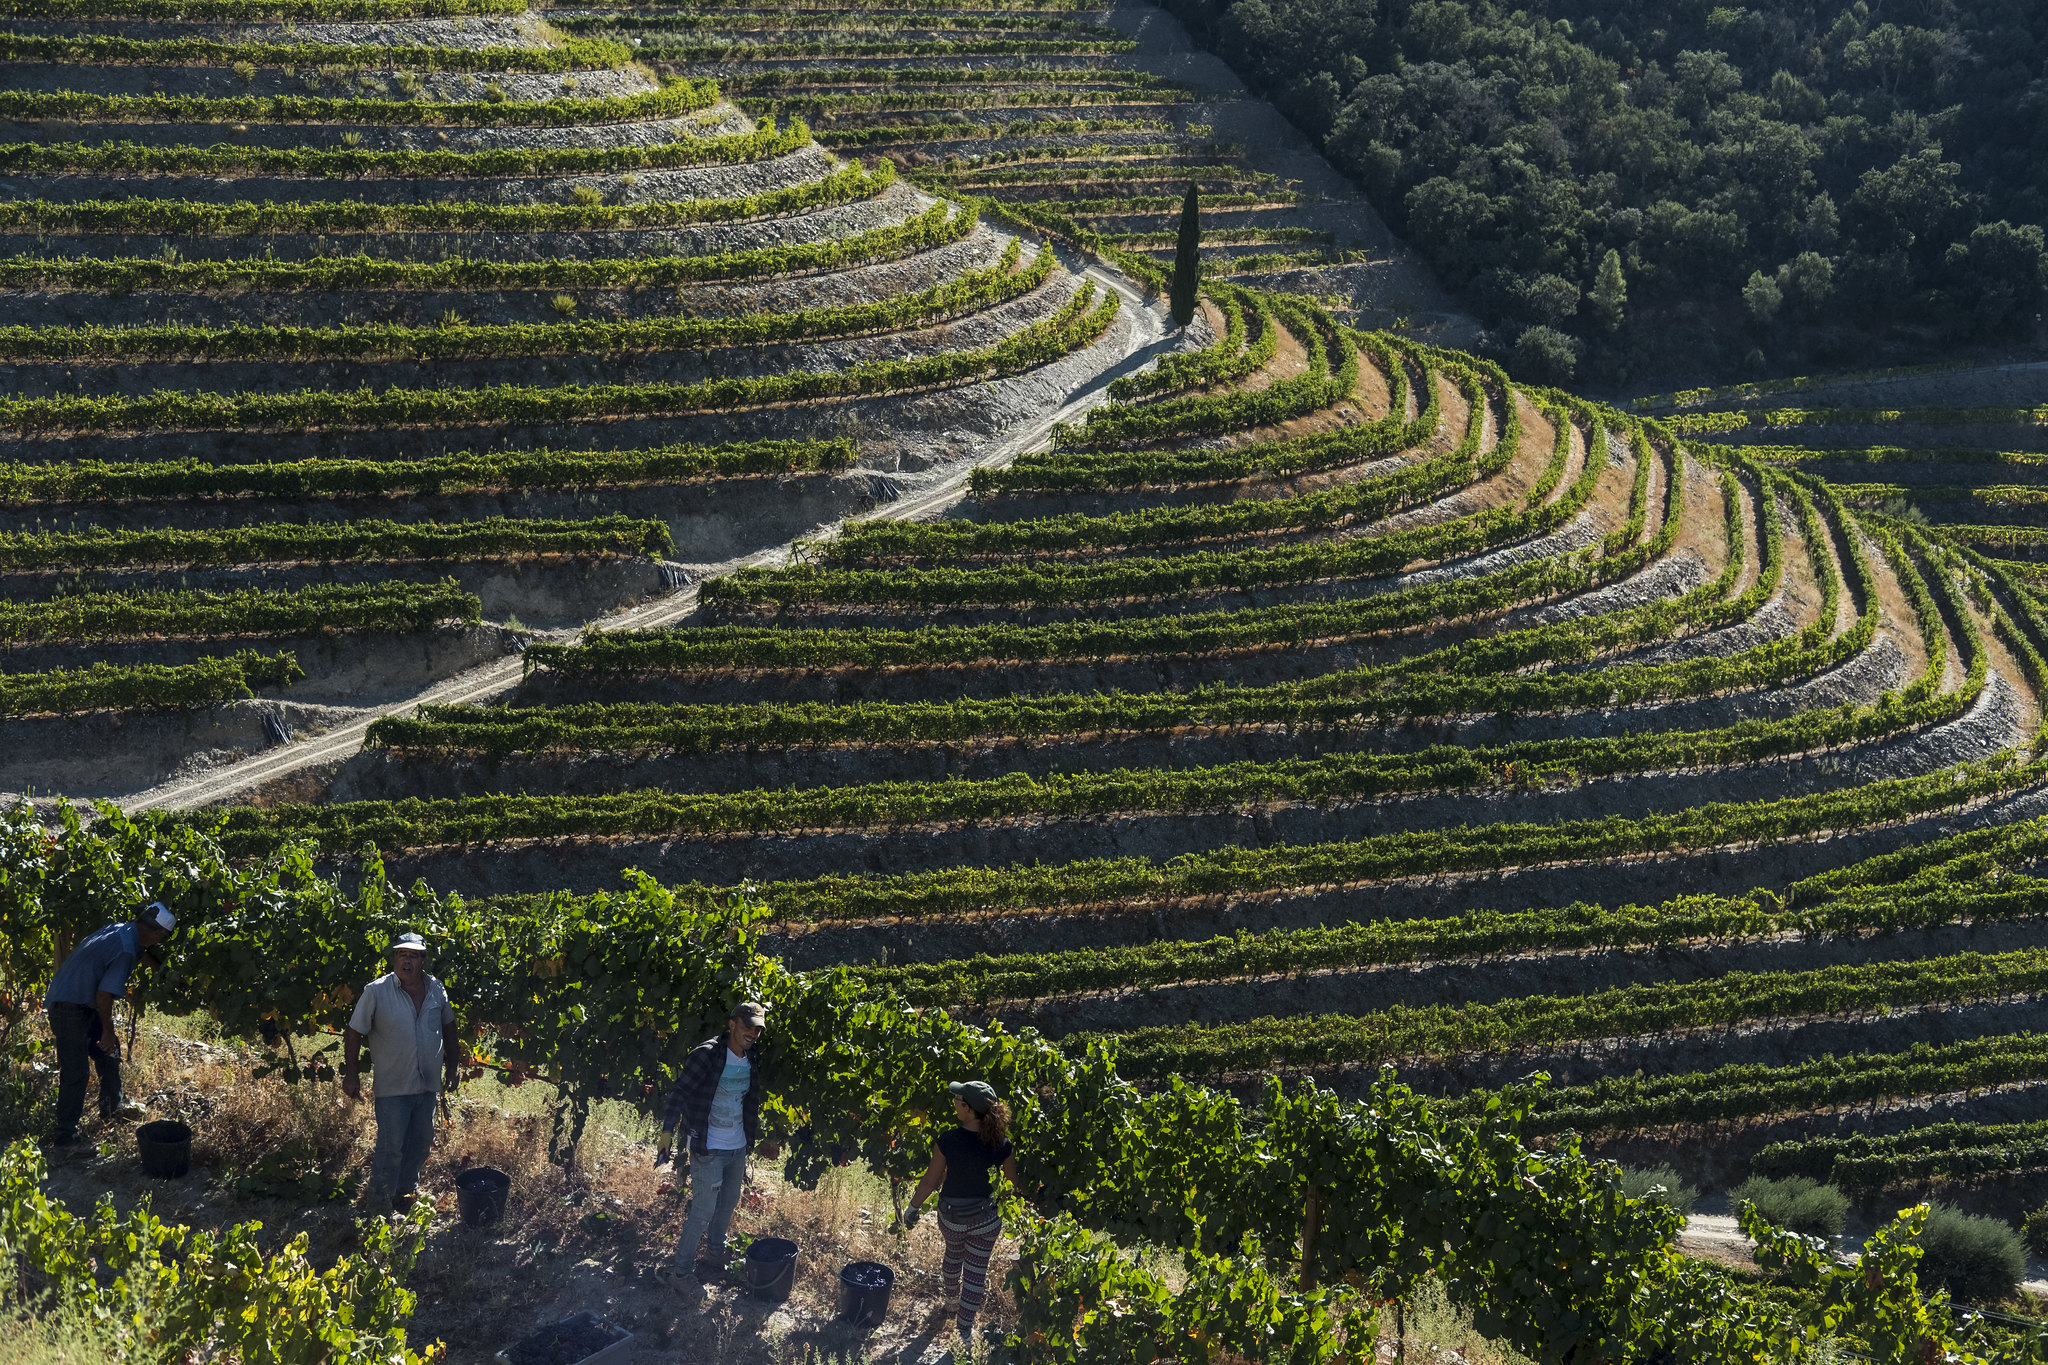 Wine for Good: promoting inclusion and community enhancement in Porto, Douro, and Vinhos Verdes